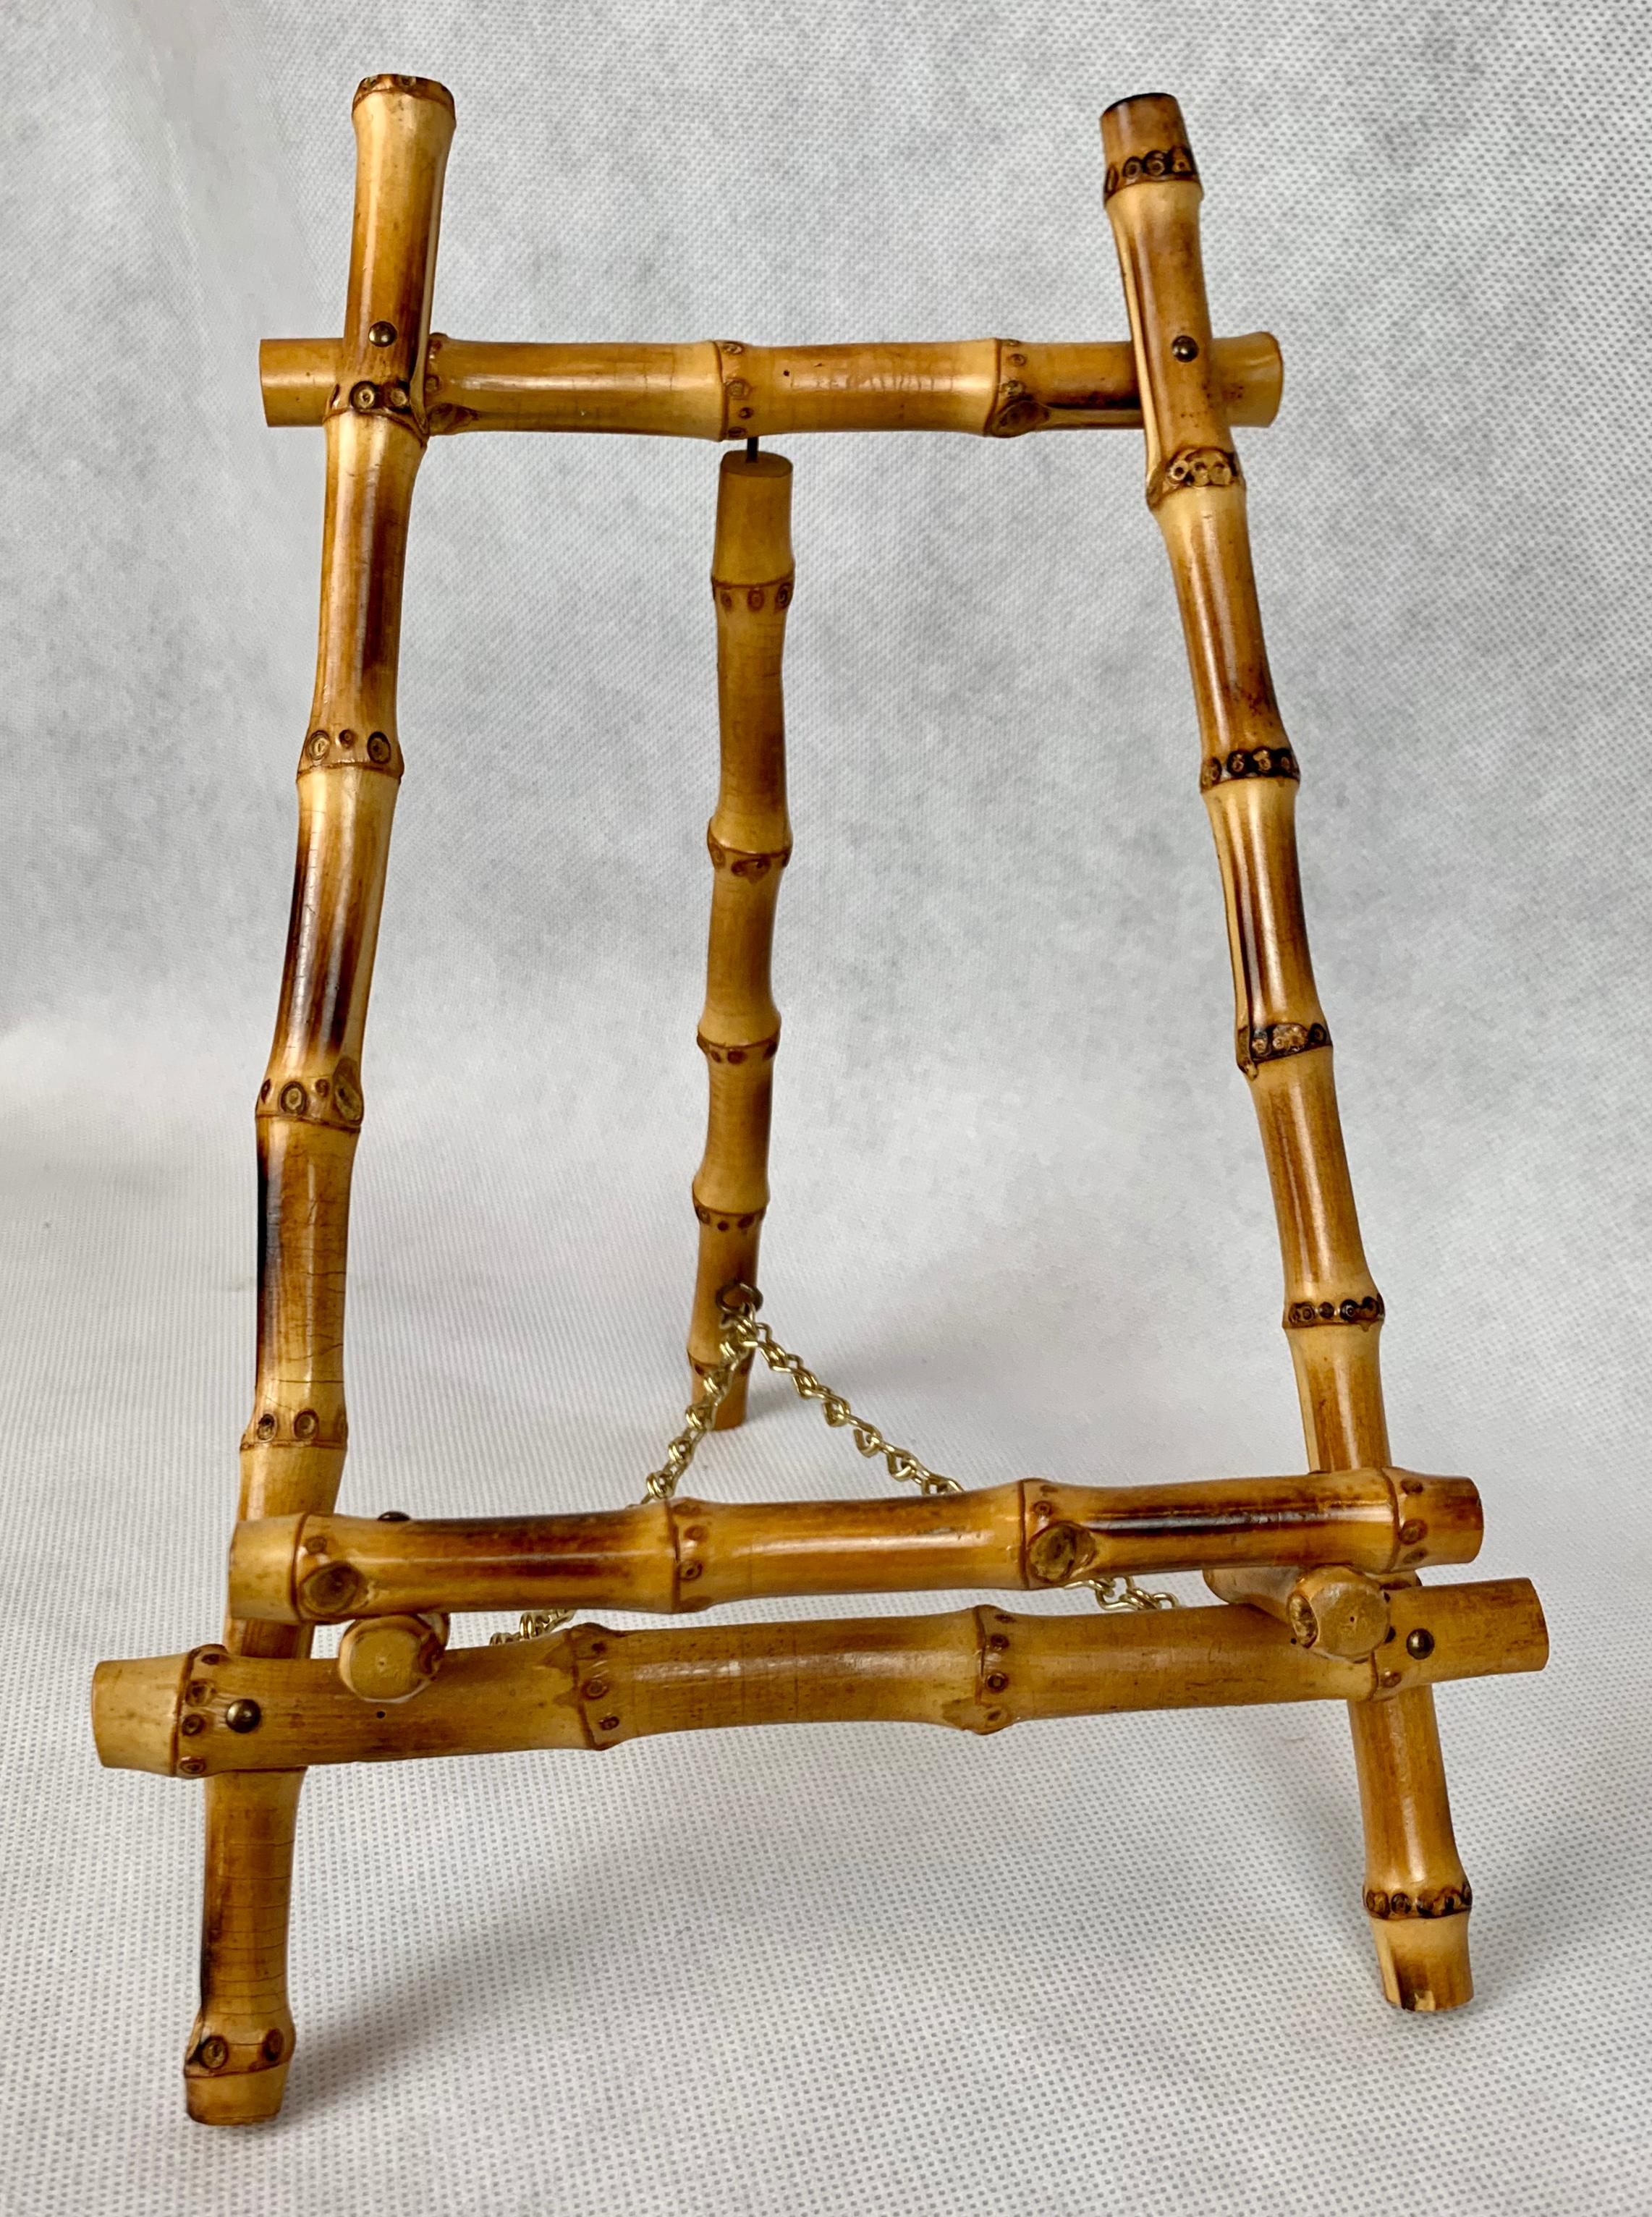 A pair of stylish bamboo easels complete with brass chains from the 1950s. They would be perfect to show off a pair of prints or other collectibles that would fit comfortably. You could try plates, flat plaques or photos. They are well made and in